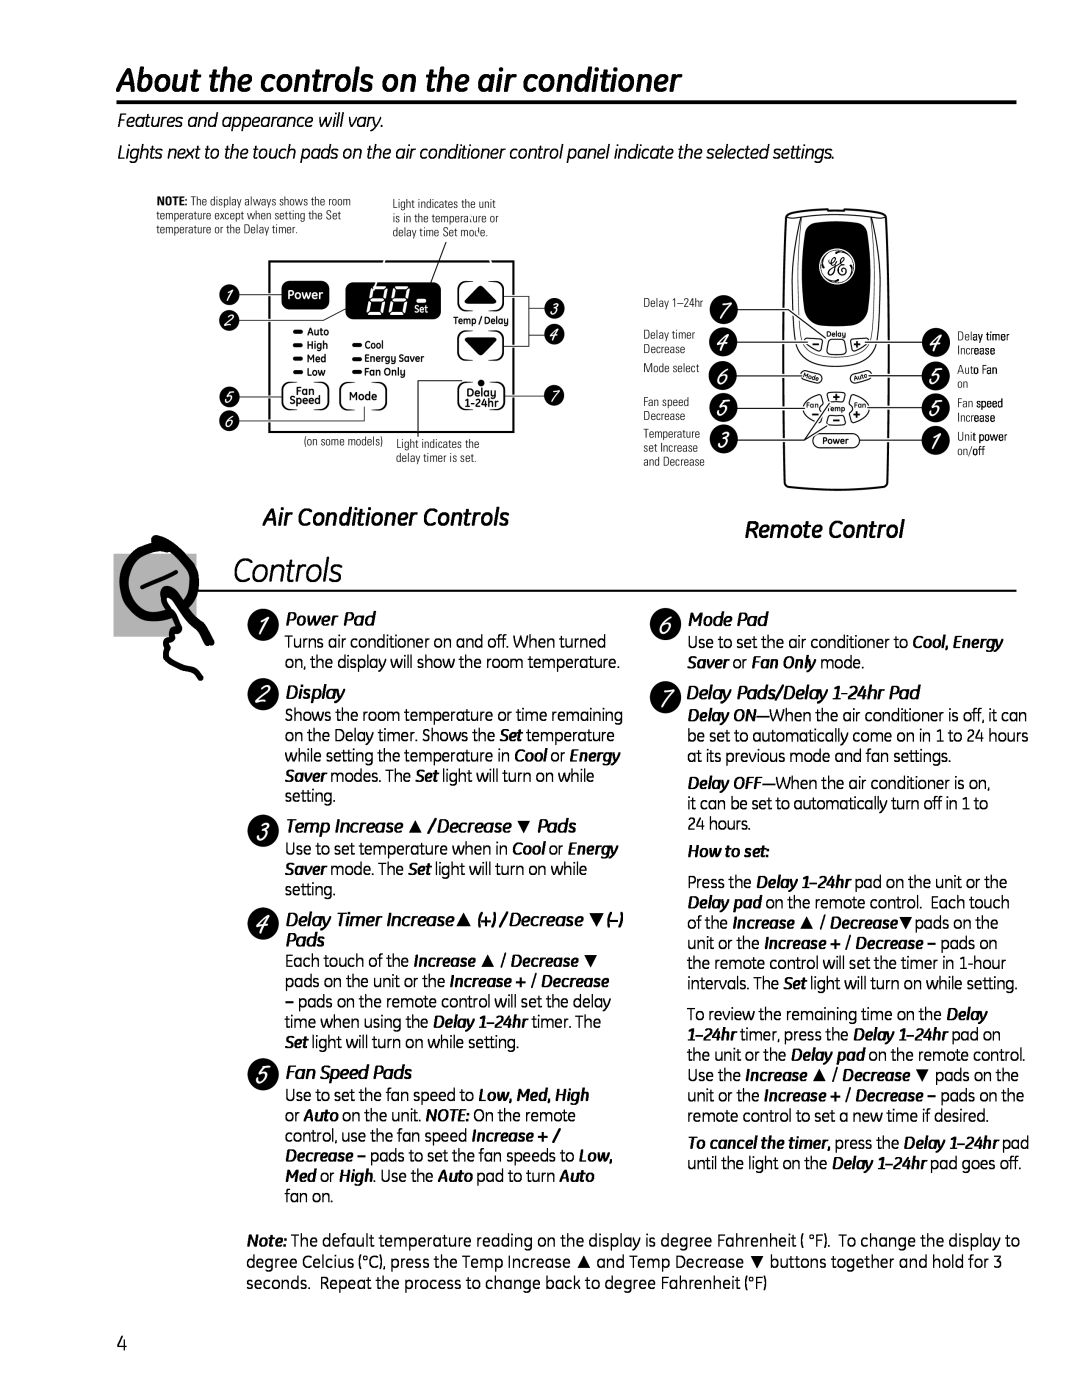 GE AEQ25 About the controls on the air conditioner, Air Conditioner Controls, Remote Control, Power Pad, Mode Pad 